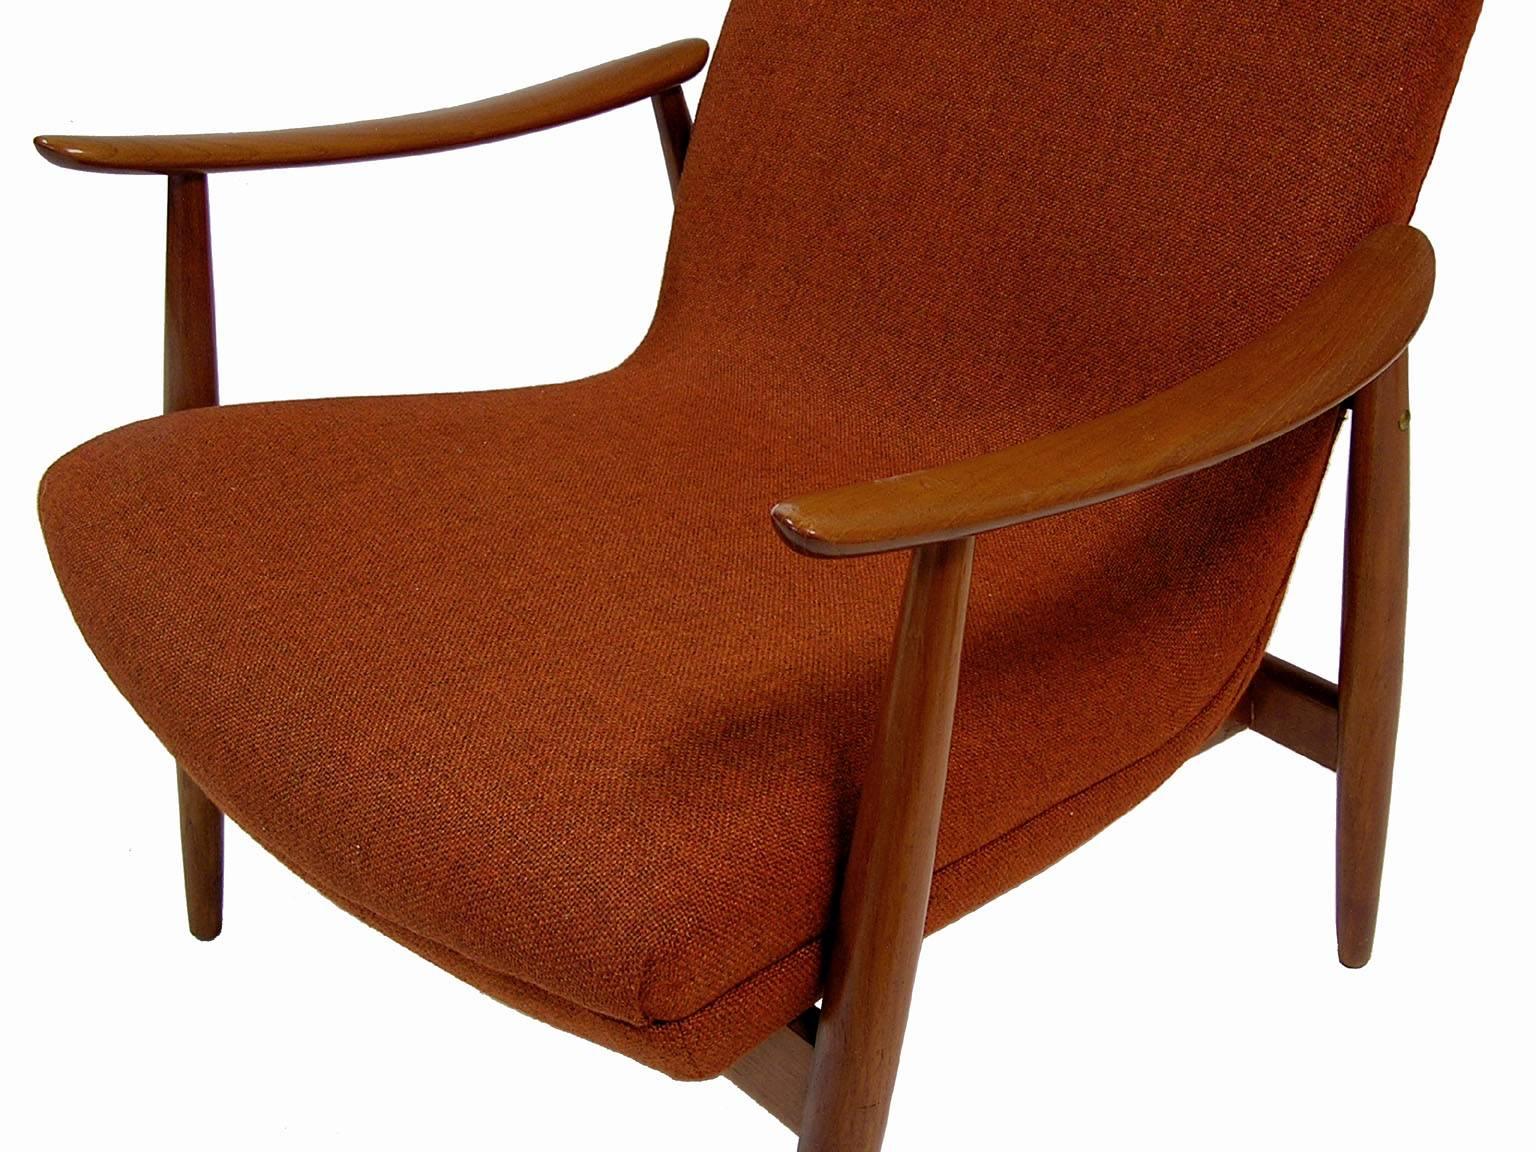 1960s Teak Lounge Chair by Ingmar Relling for Westnofa In Excellent Condition In Winnipeg, Manitoba